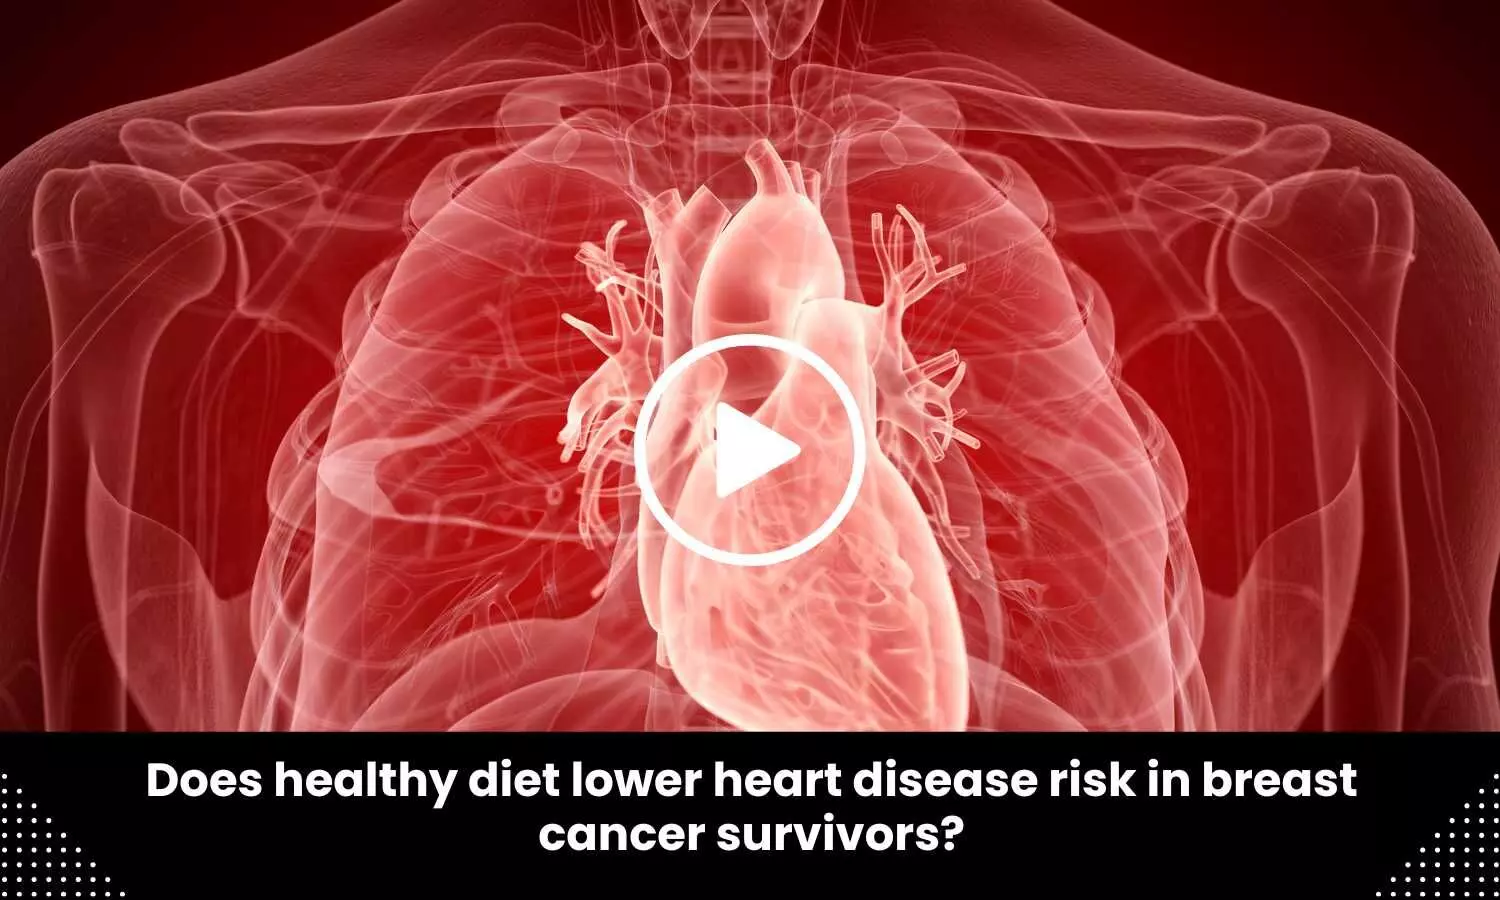 Does healthy diet lower heart disease risk in breast cancer survivors?